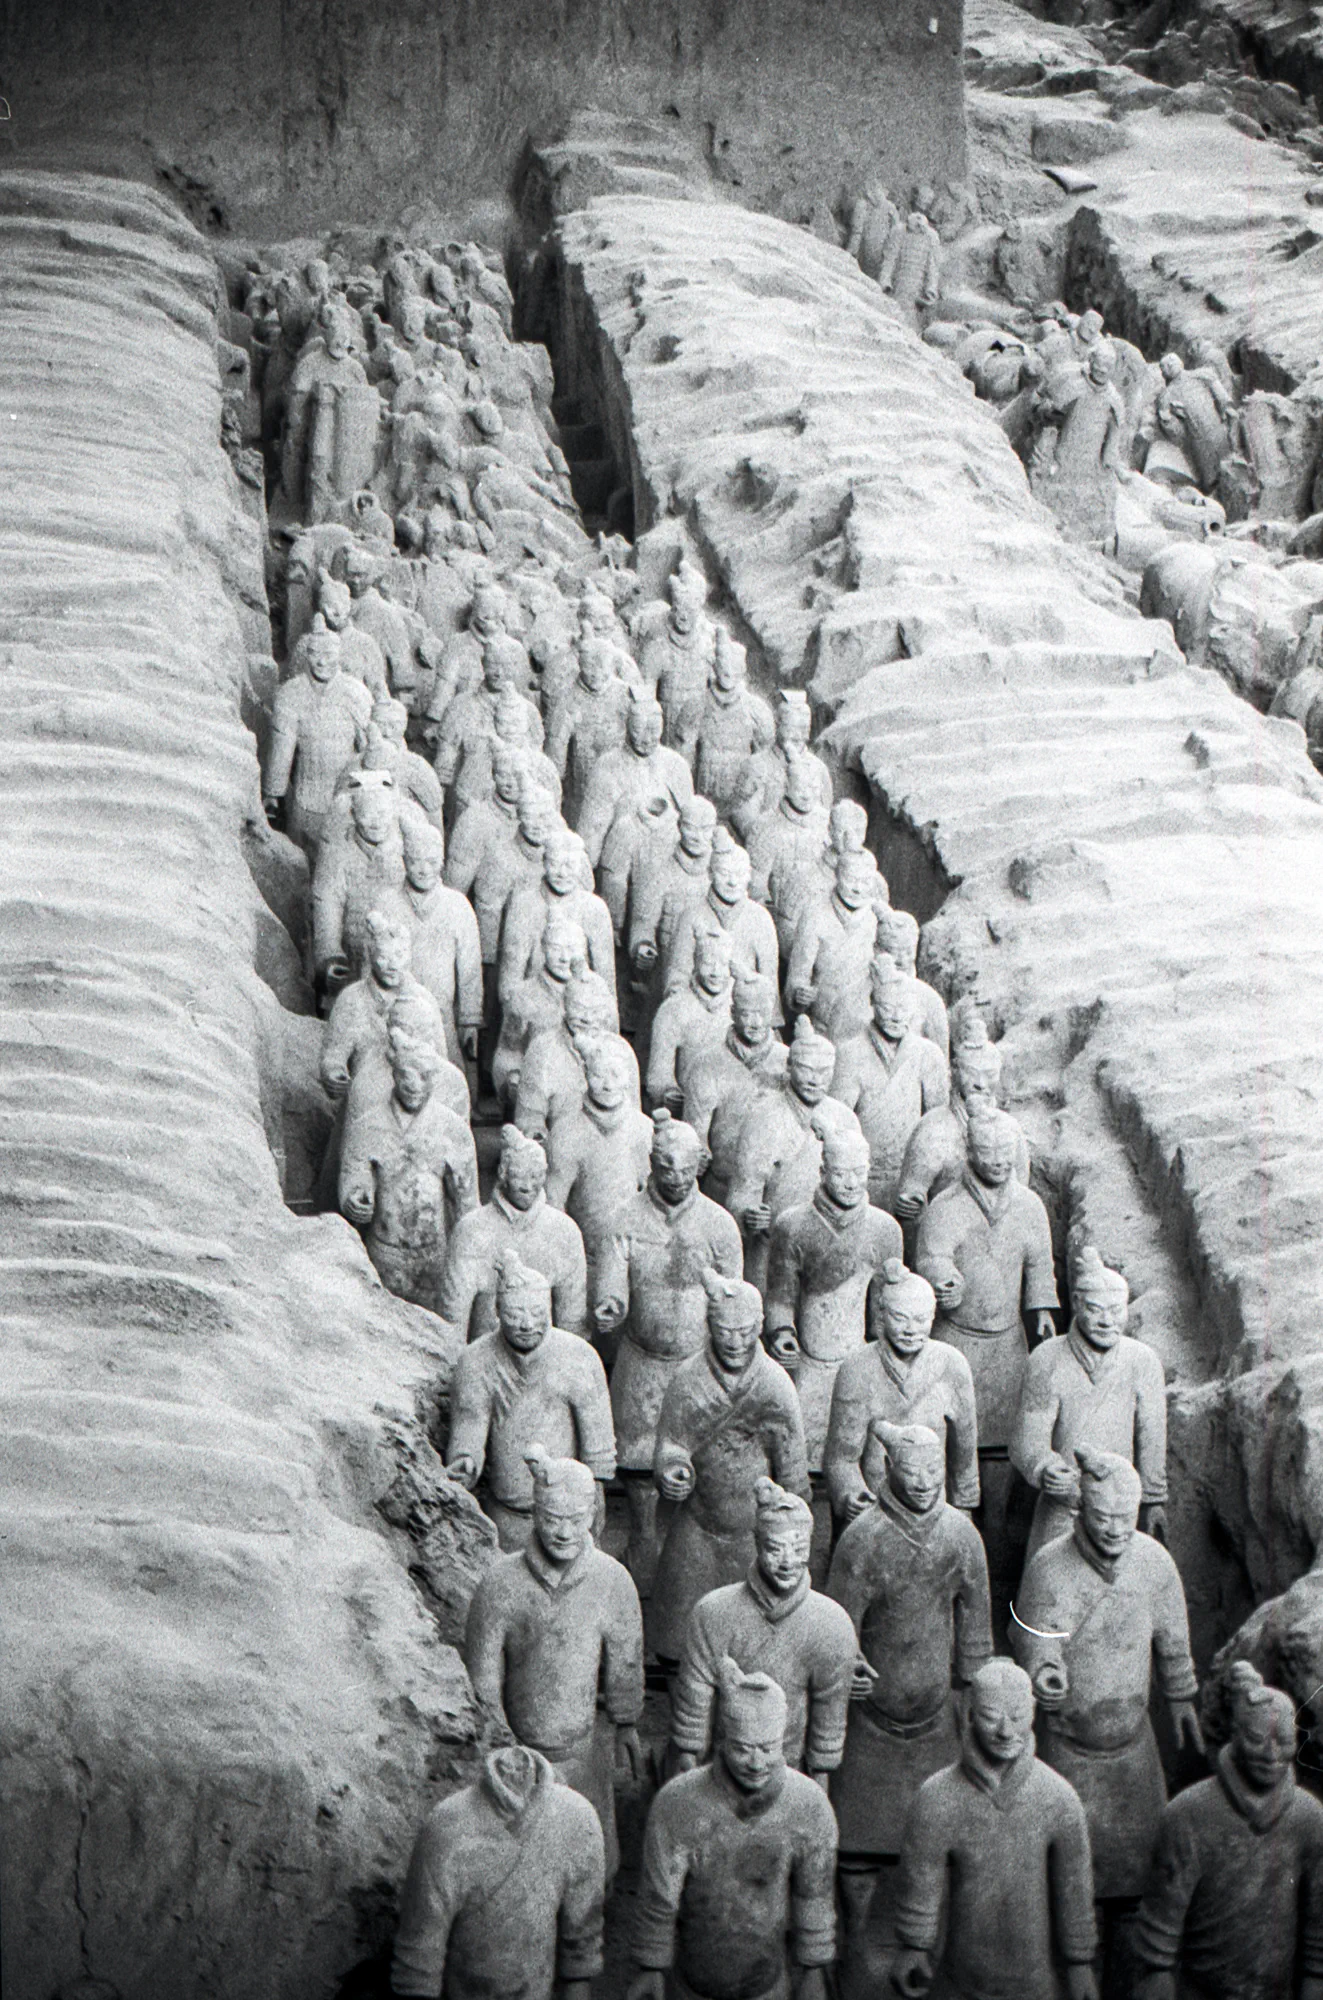 Terracotta Warriors in the trenches